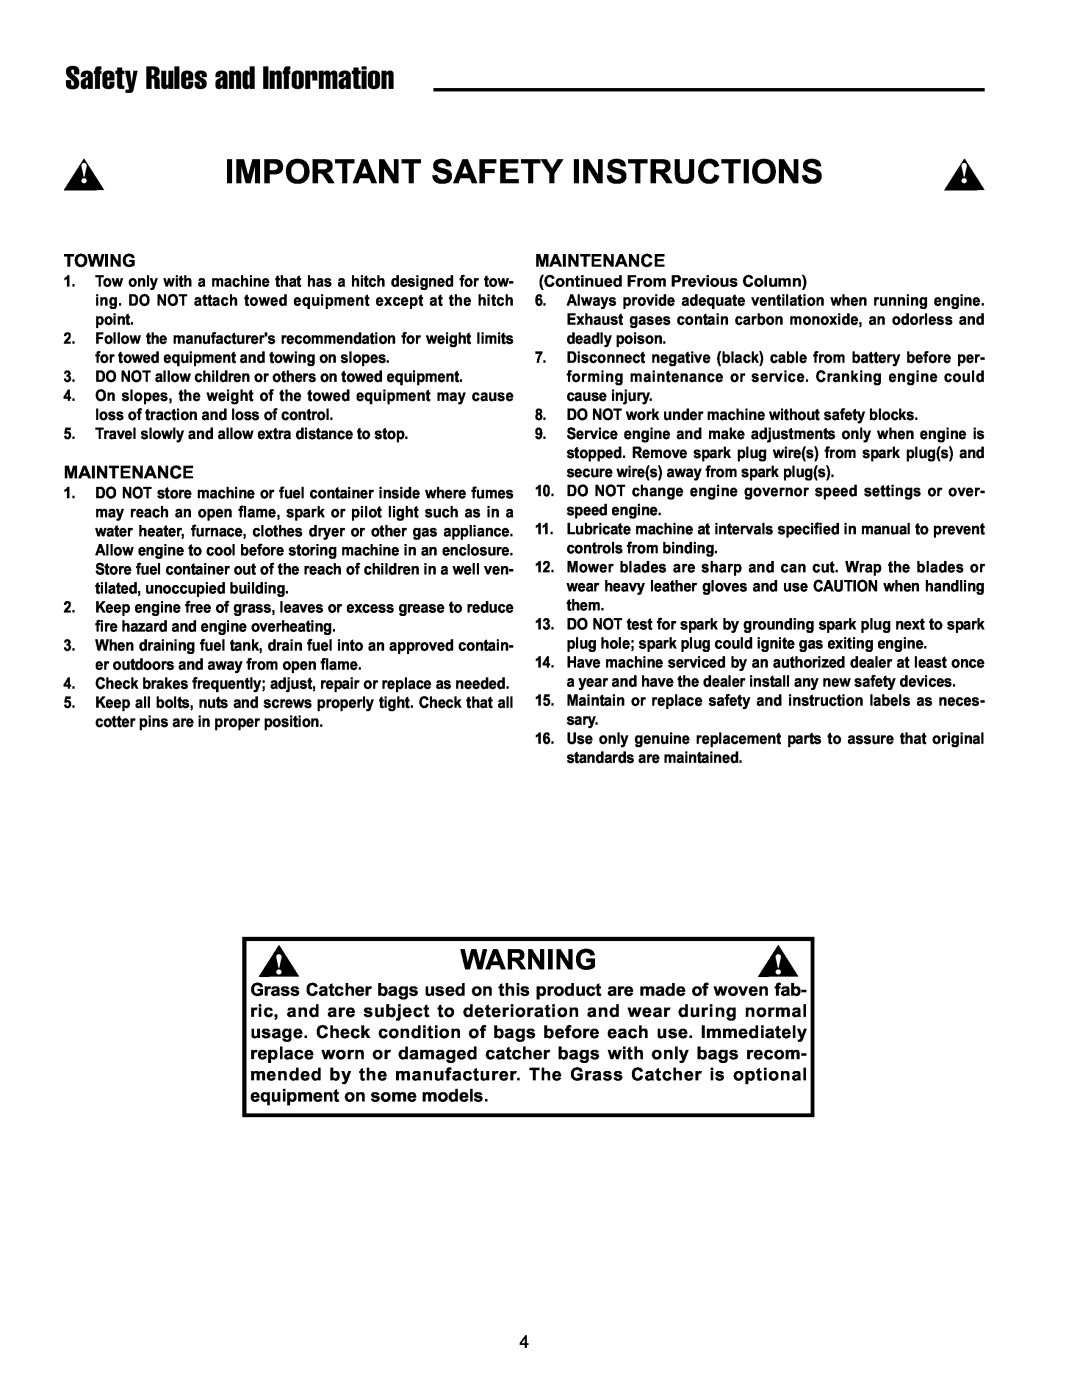 Simplicity 250 Z manual Important Safety Instructions, Safety Rules and Information, Towing, Maintenance 